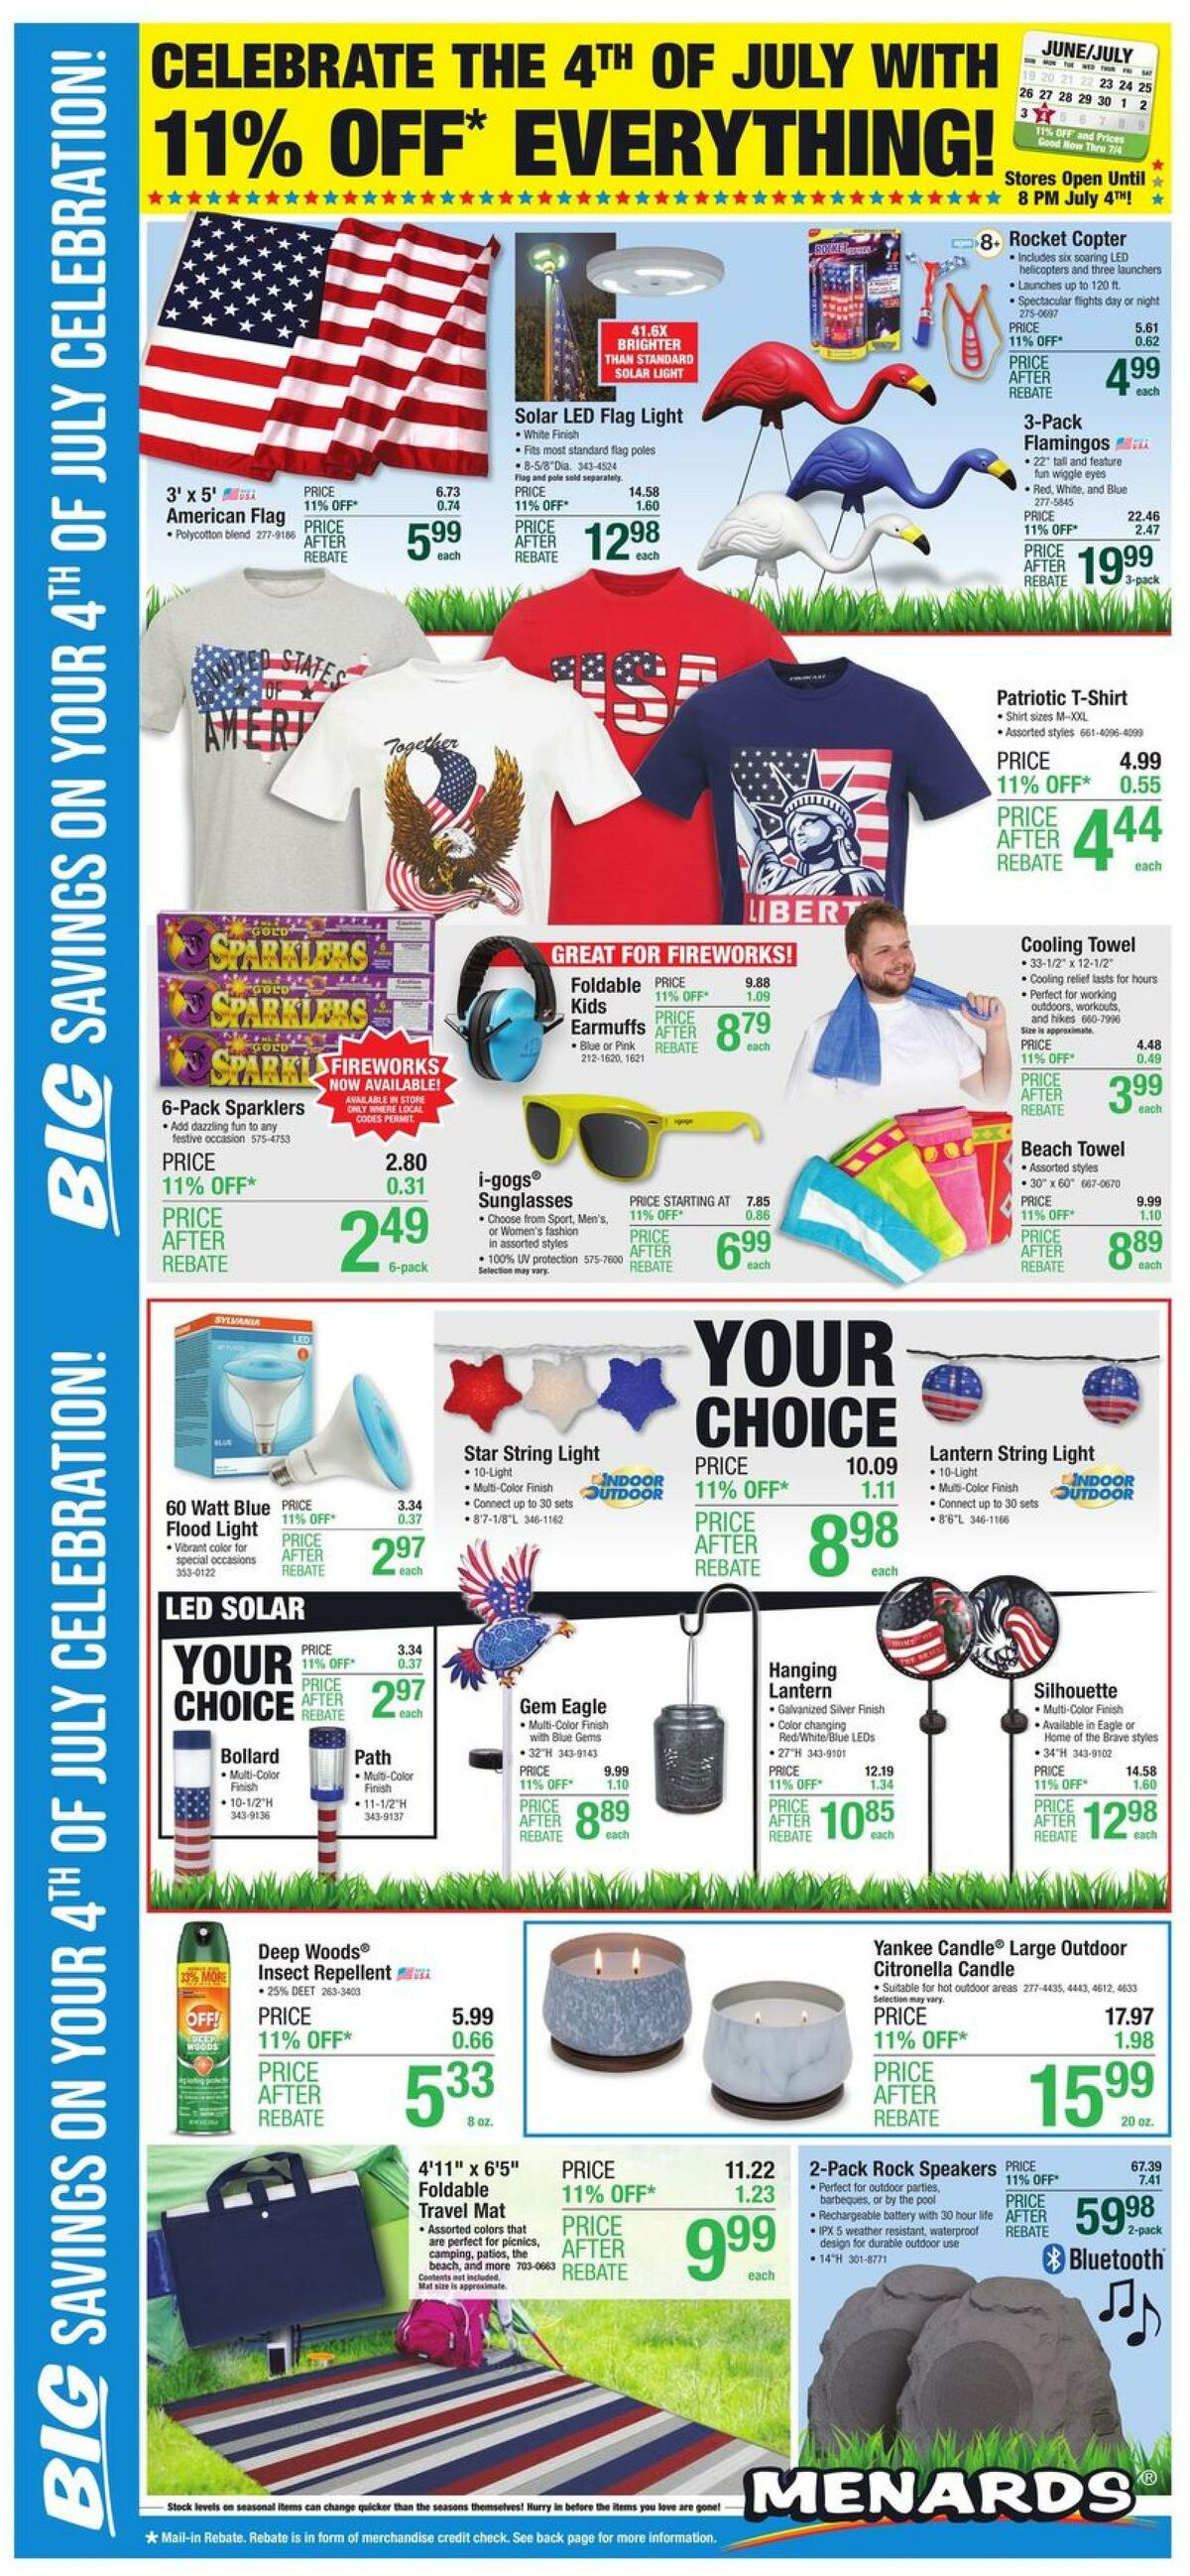 Menards 4TH OF JULY Weekly Ads & Special Buys from June 22